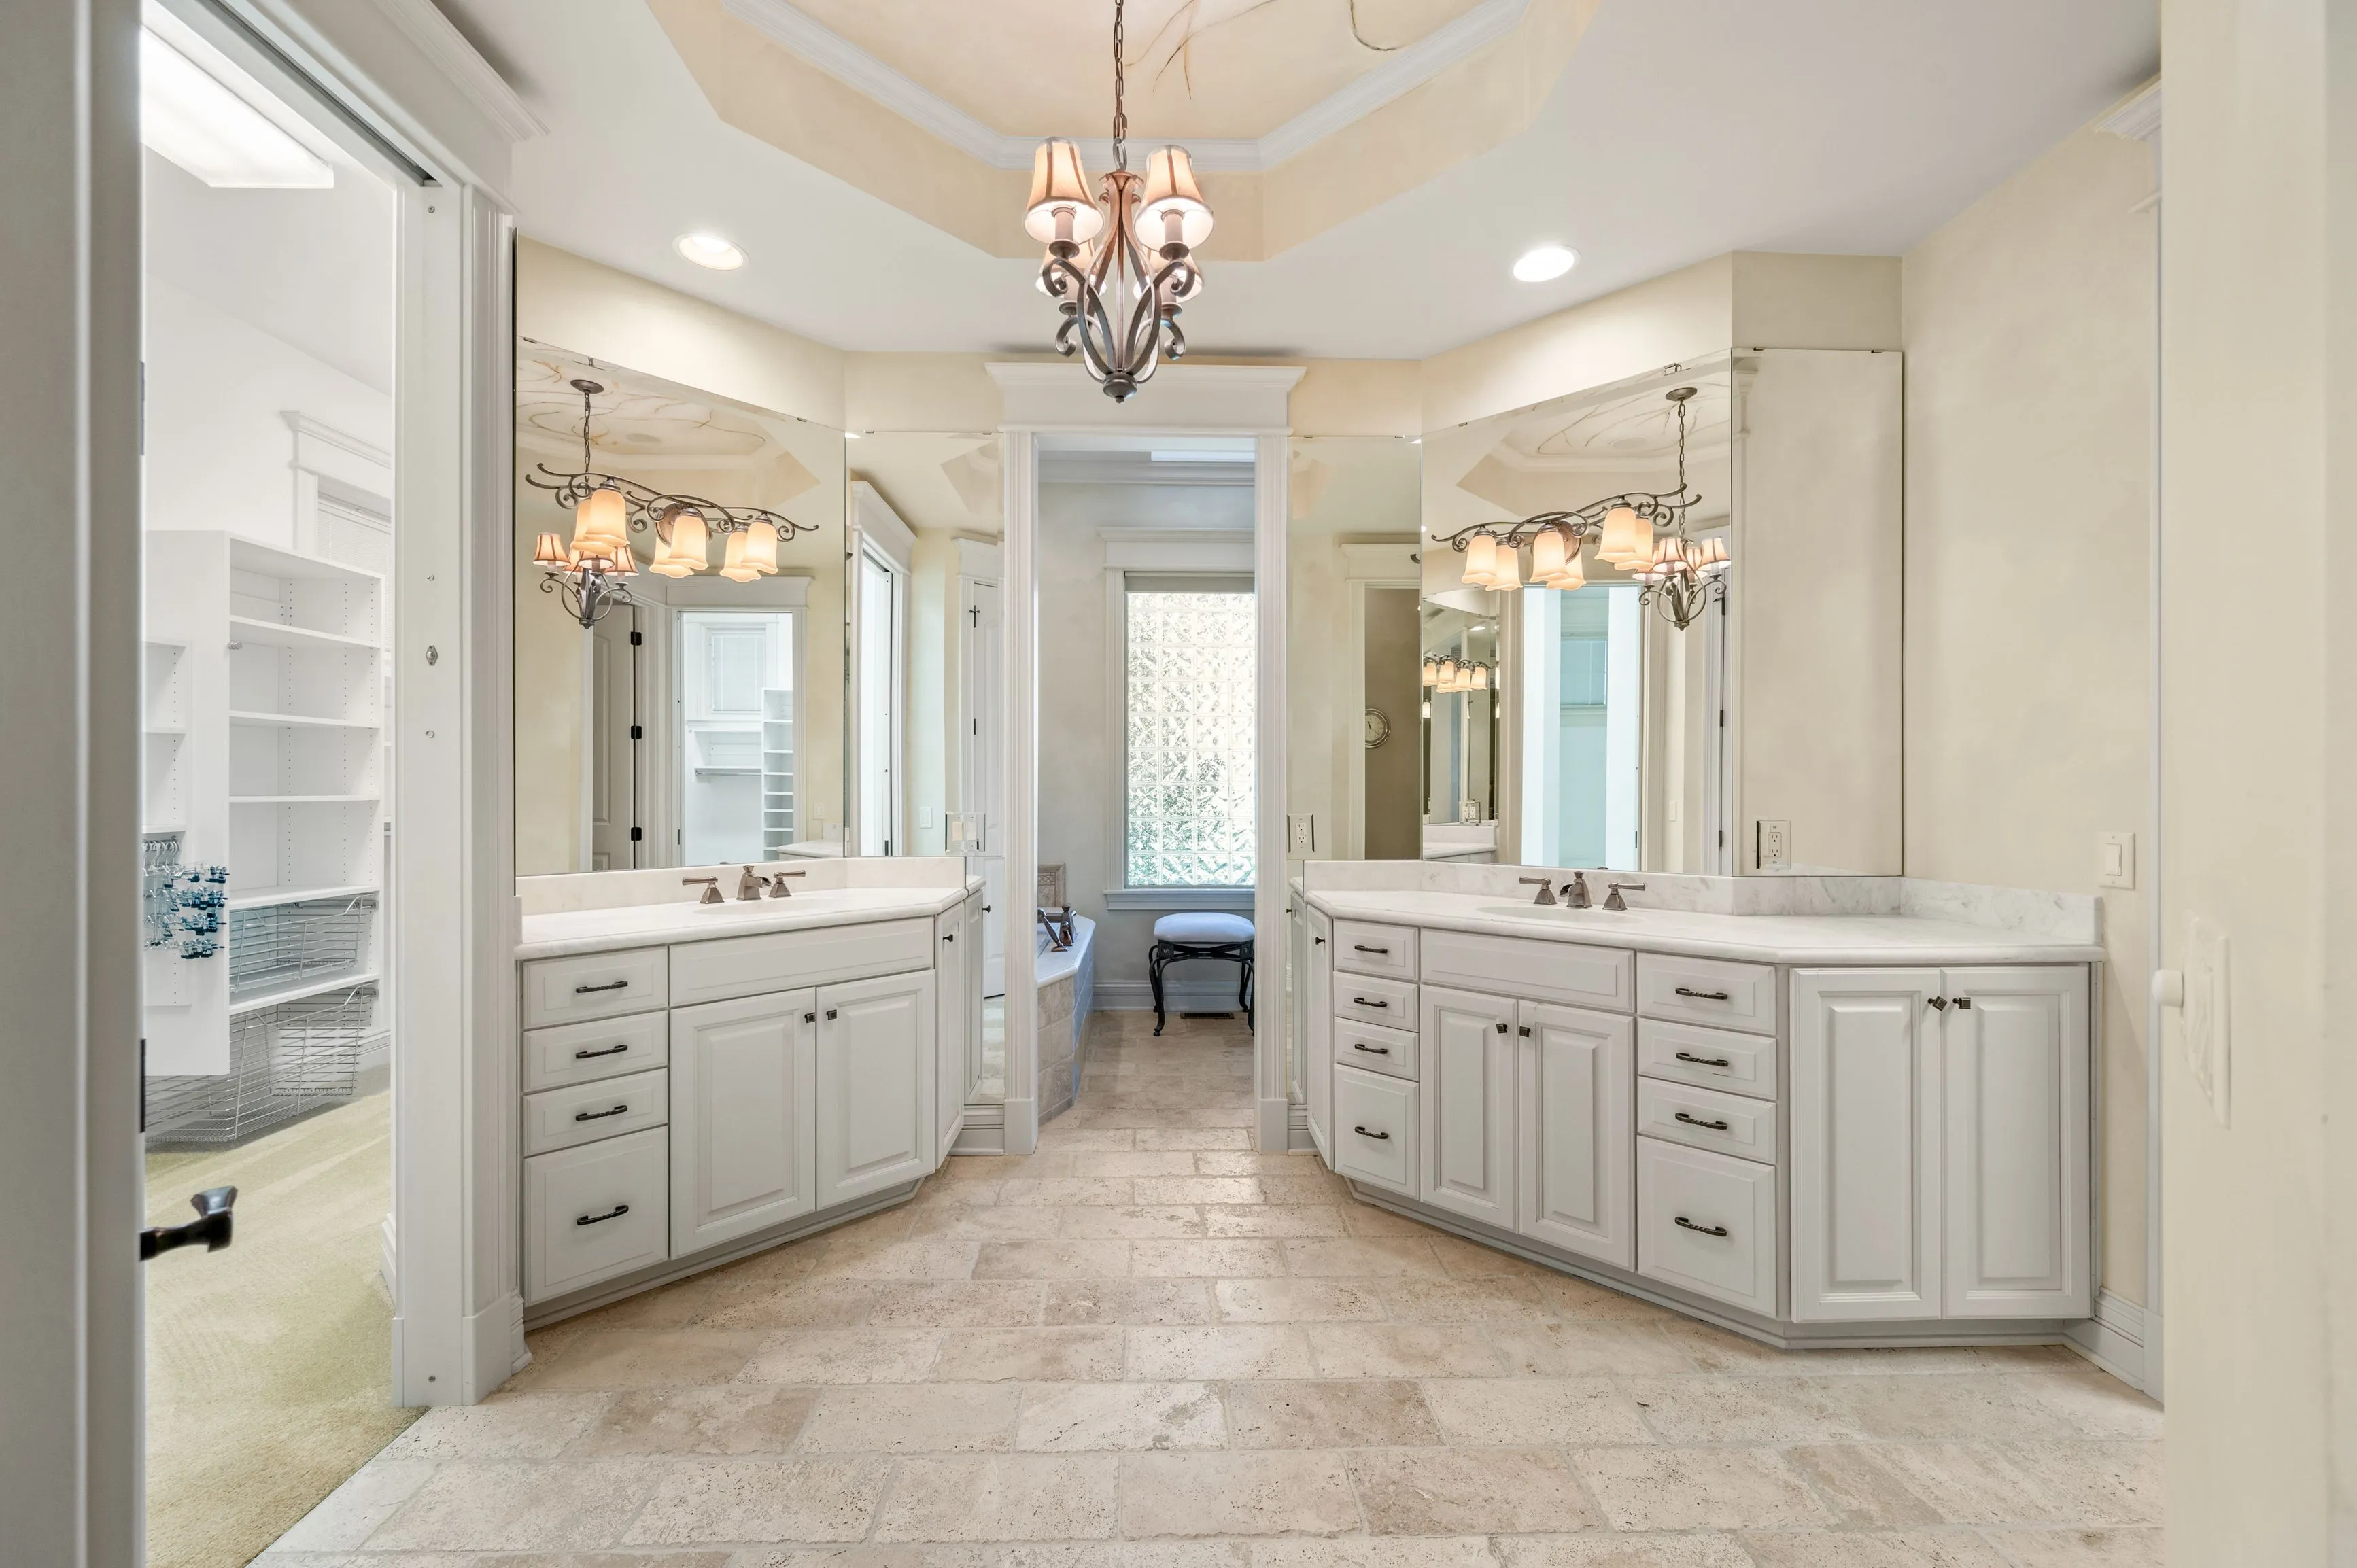 Elegant, spacious bathroom interior with dual white vanities, marble countertops, and a stone-tiled floor, leading to a frosted glass window and a separate shower area.